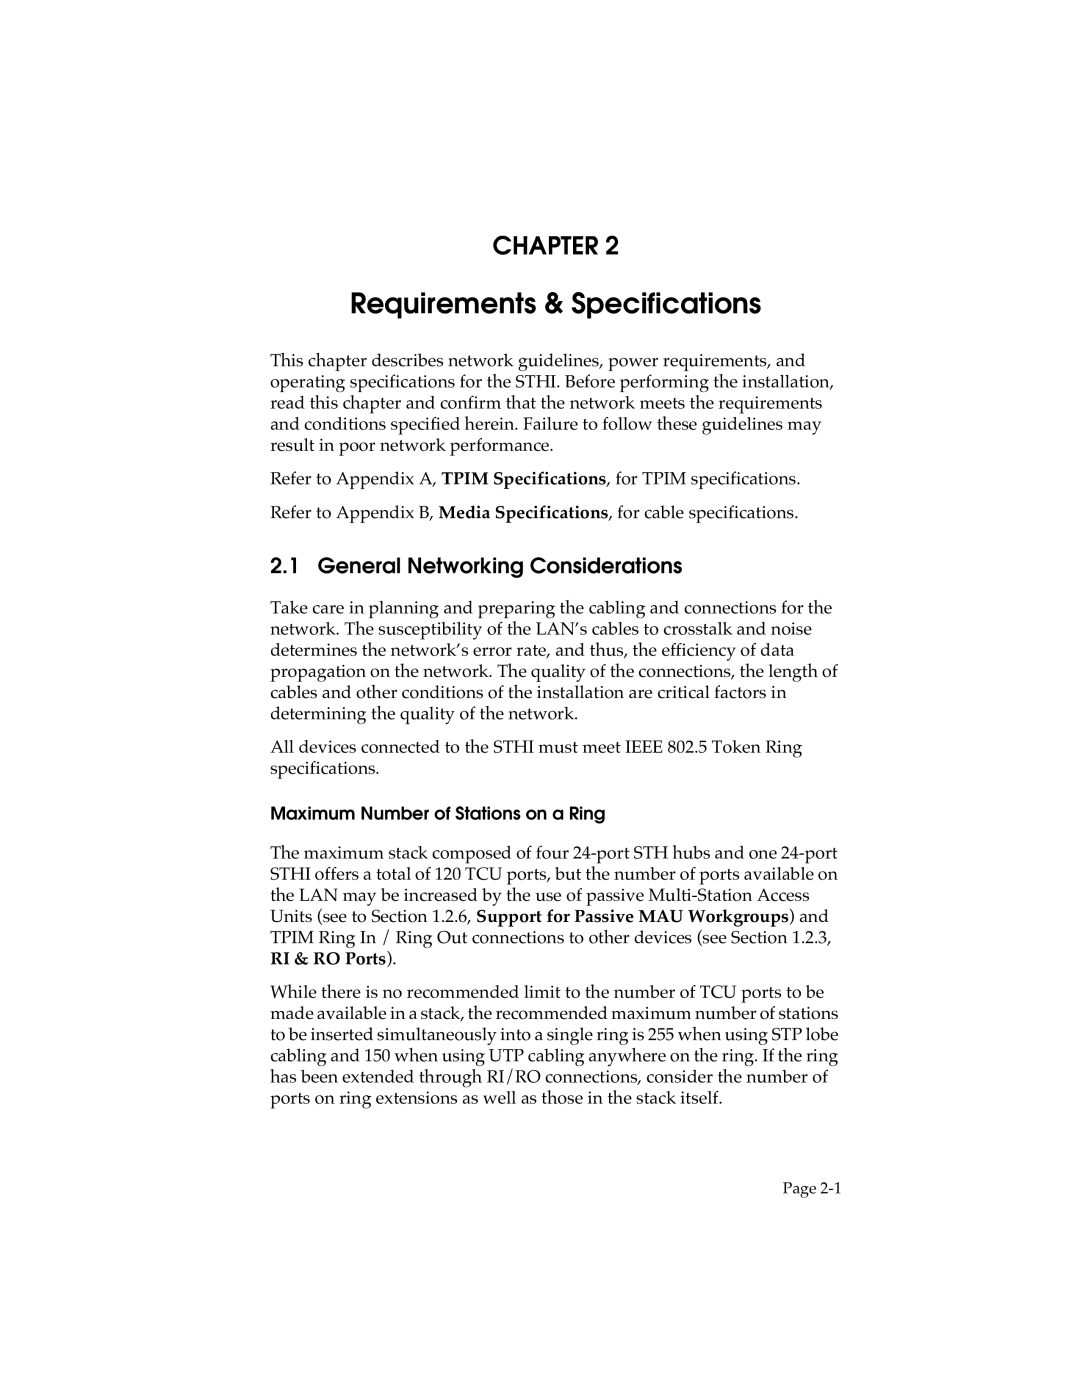 Cabletron Systems STHI manual Requirements & Speciﬁcations, General Networking Considerations, Chapter 